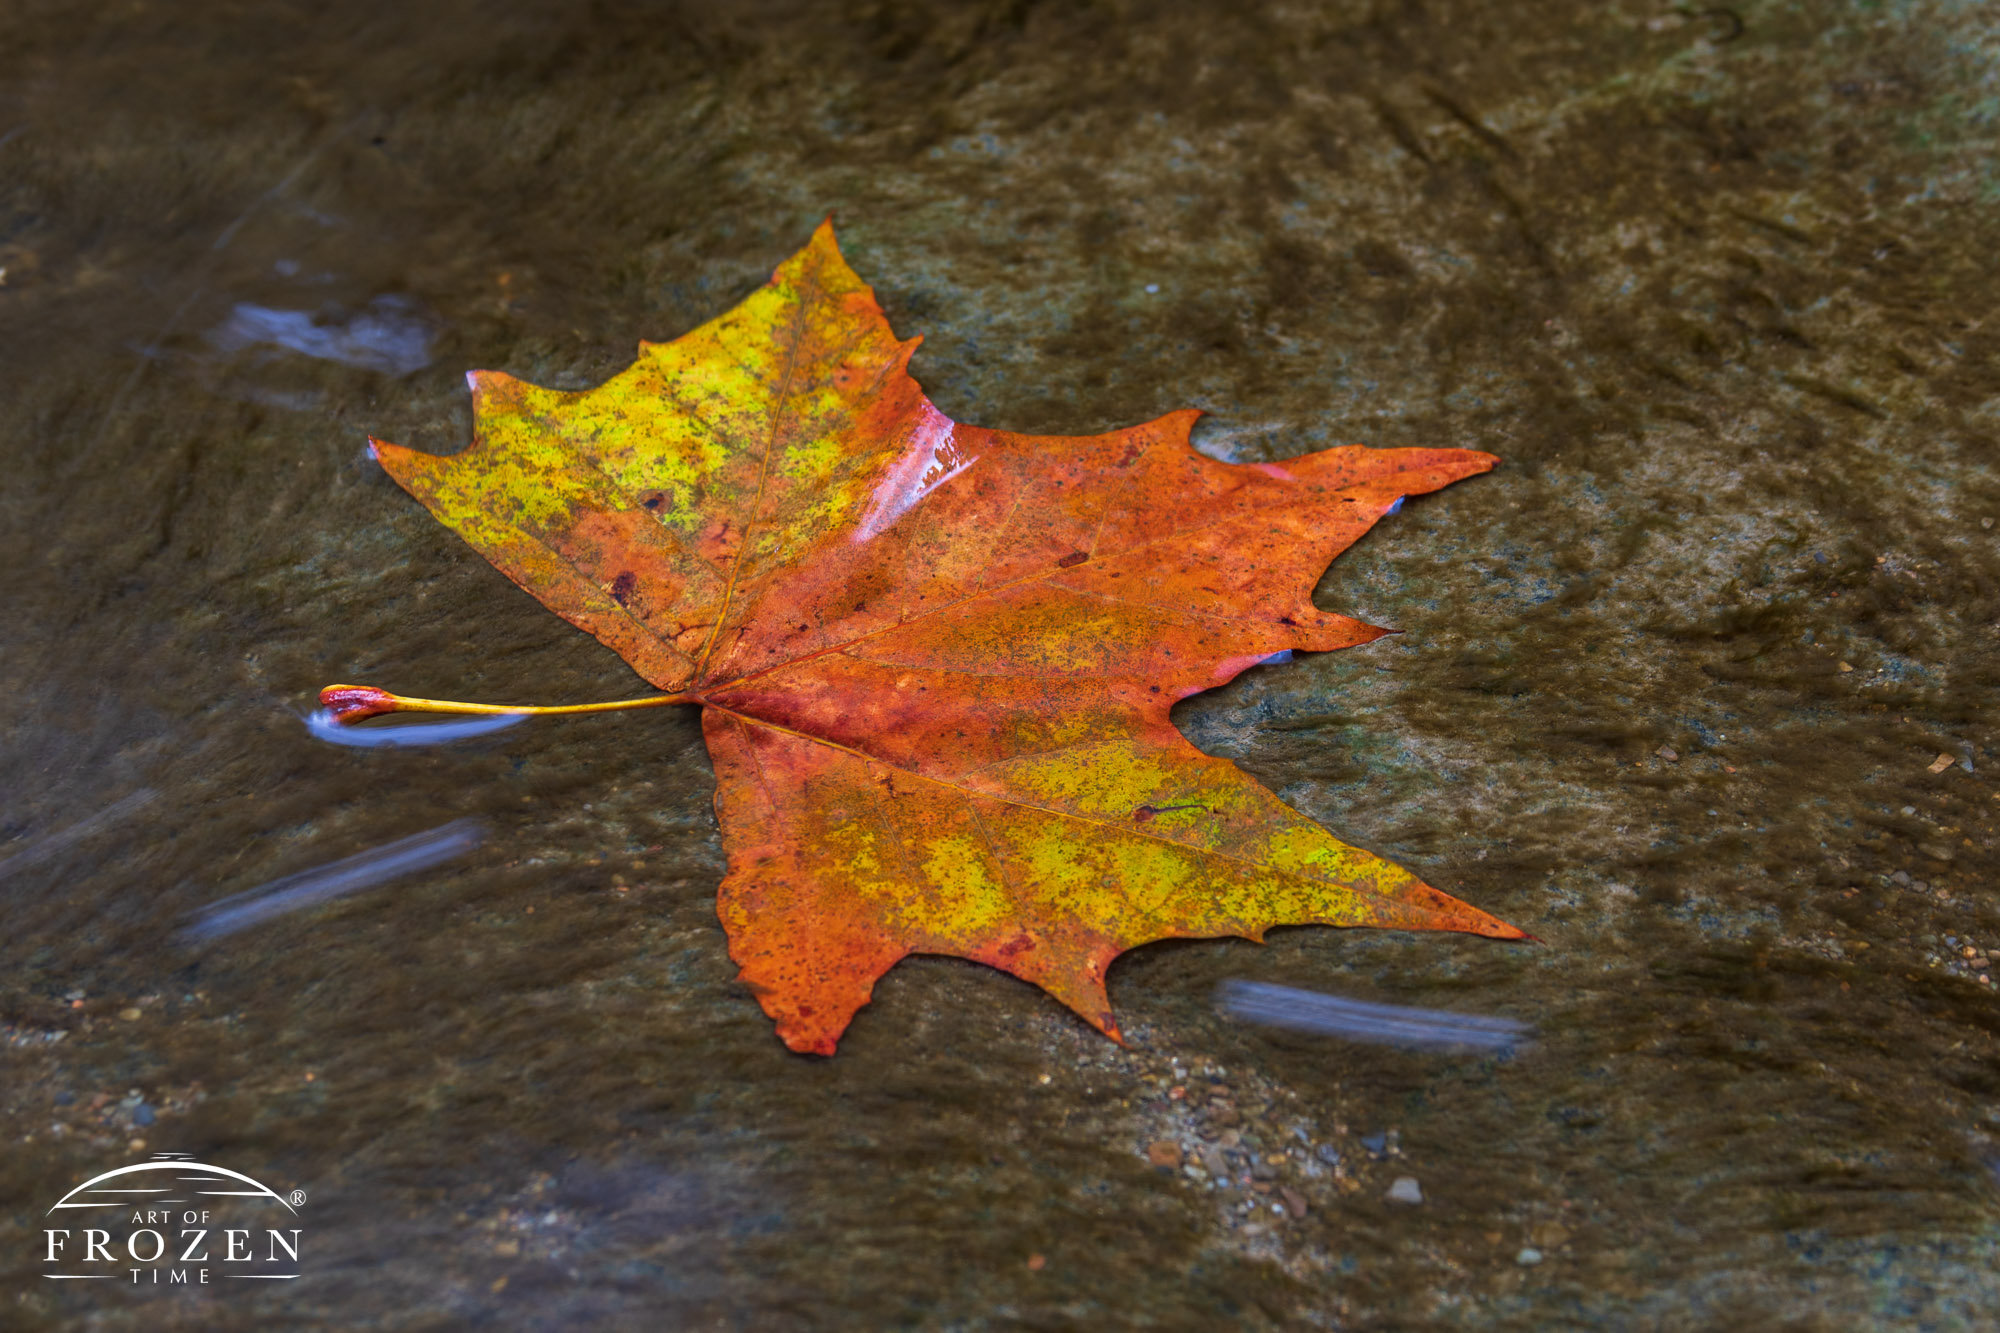 A single Sycamore leaf with the waters of Tinker's Creek in Bedford, Ohio washing over the leaf and its autumn colors.